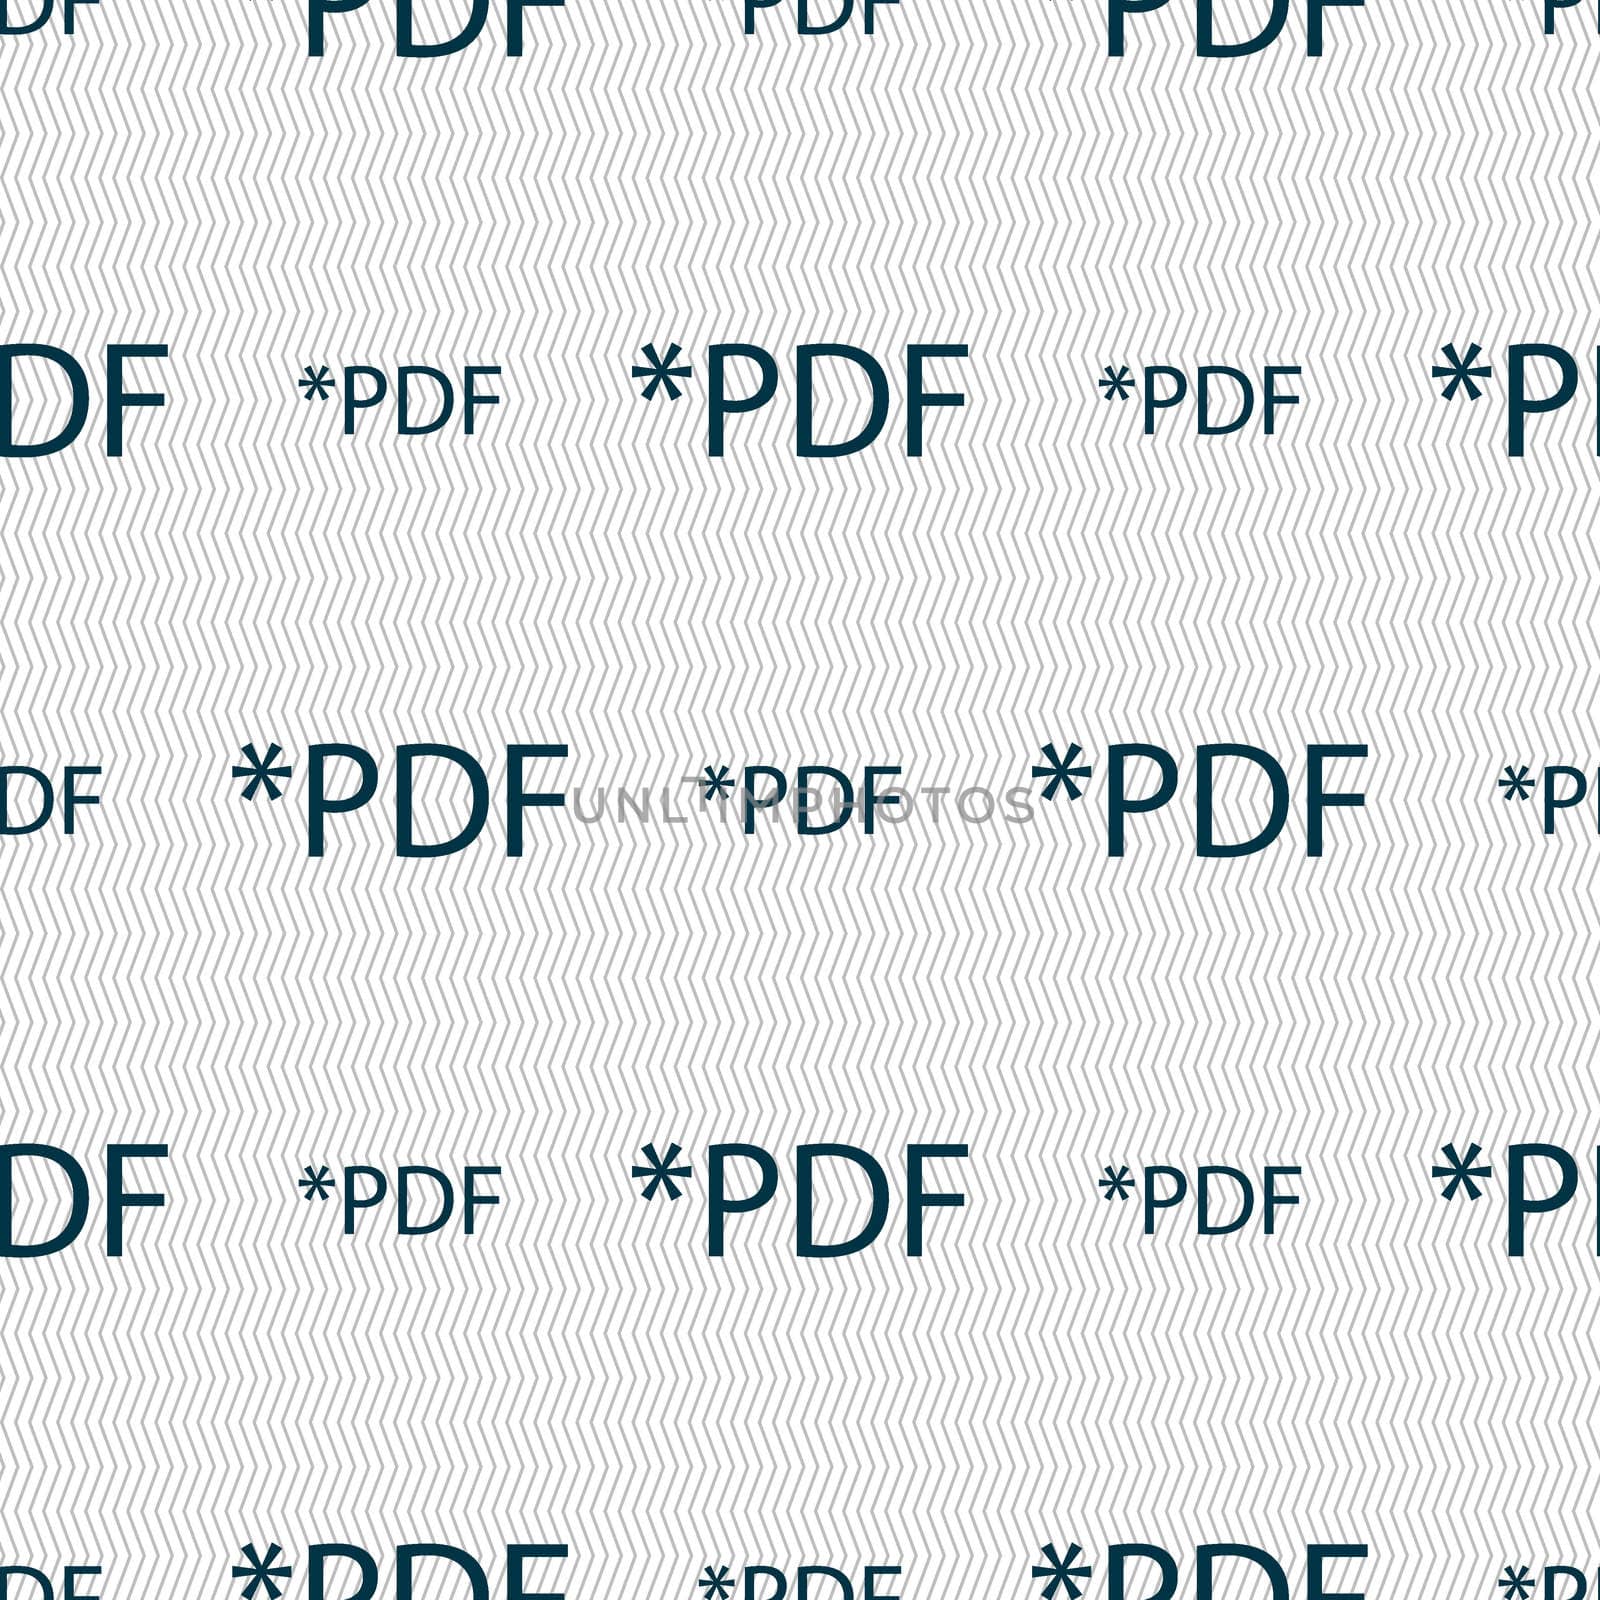 PDF file document icon. Download pdf button. PDF file extension symbol. Seamless abstract background with geometric shapes. illustration